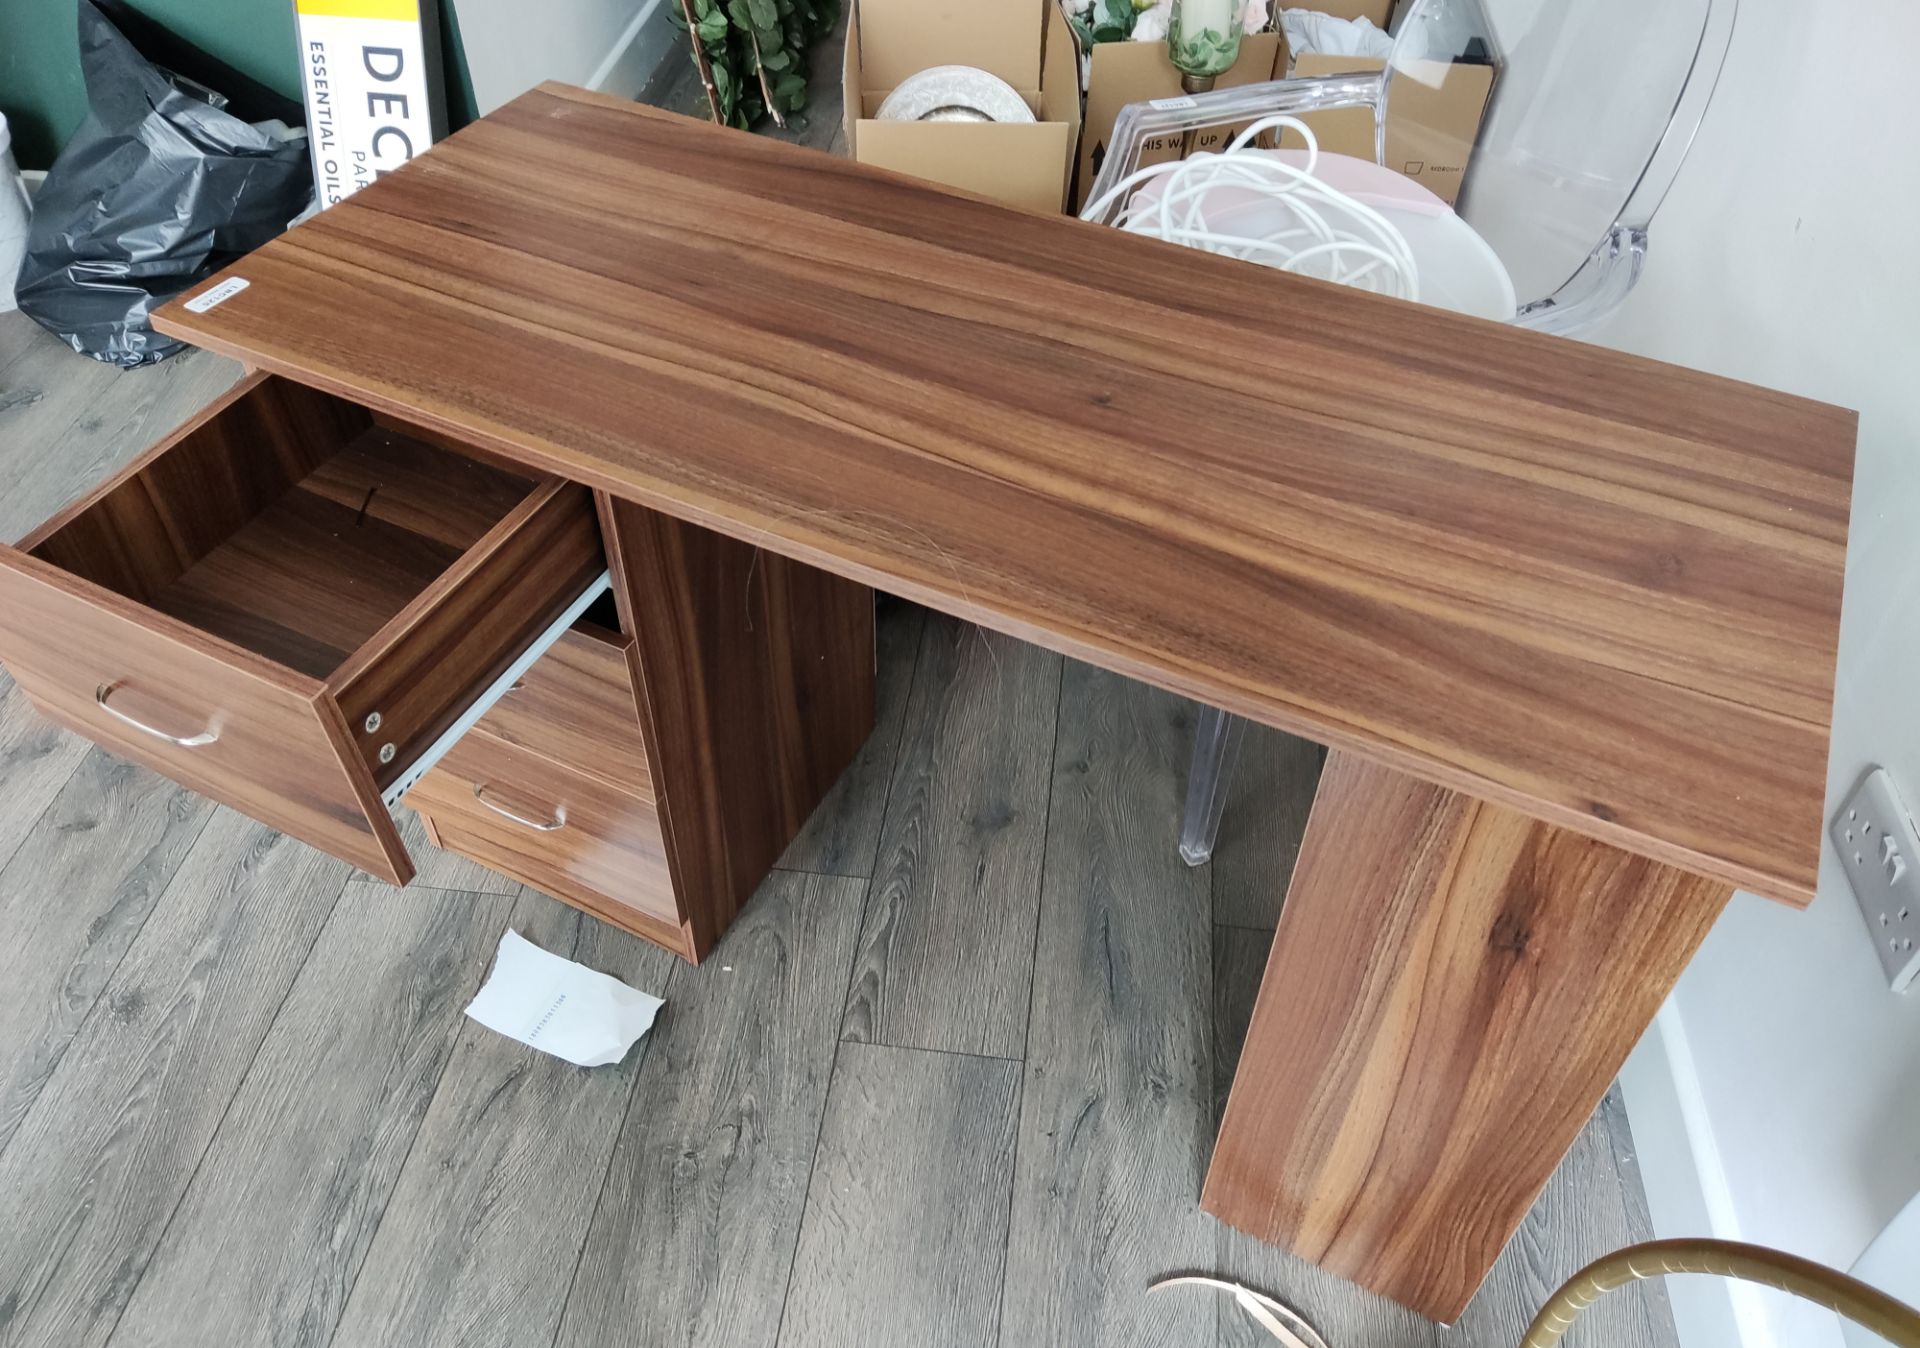 1 x Wooden Office Desk with Integrated Drawers and Shelves - LBC125 - CL763- Location: Sale M33< - Image 3 of 4